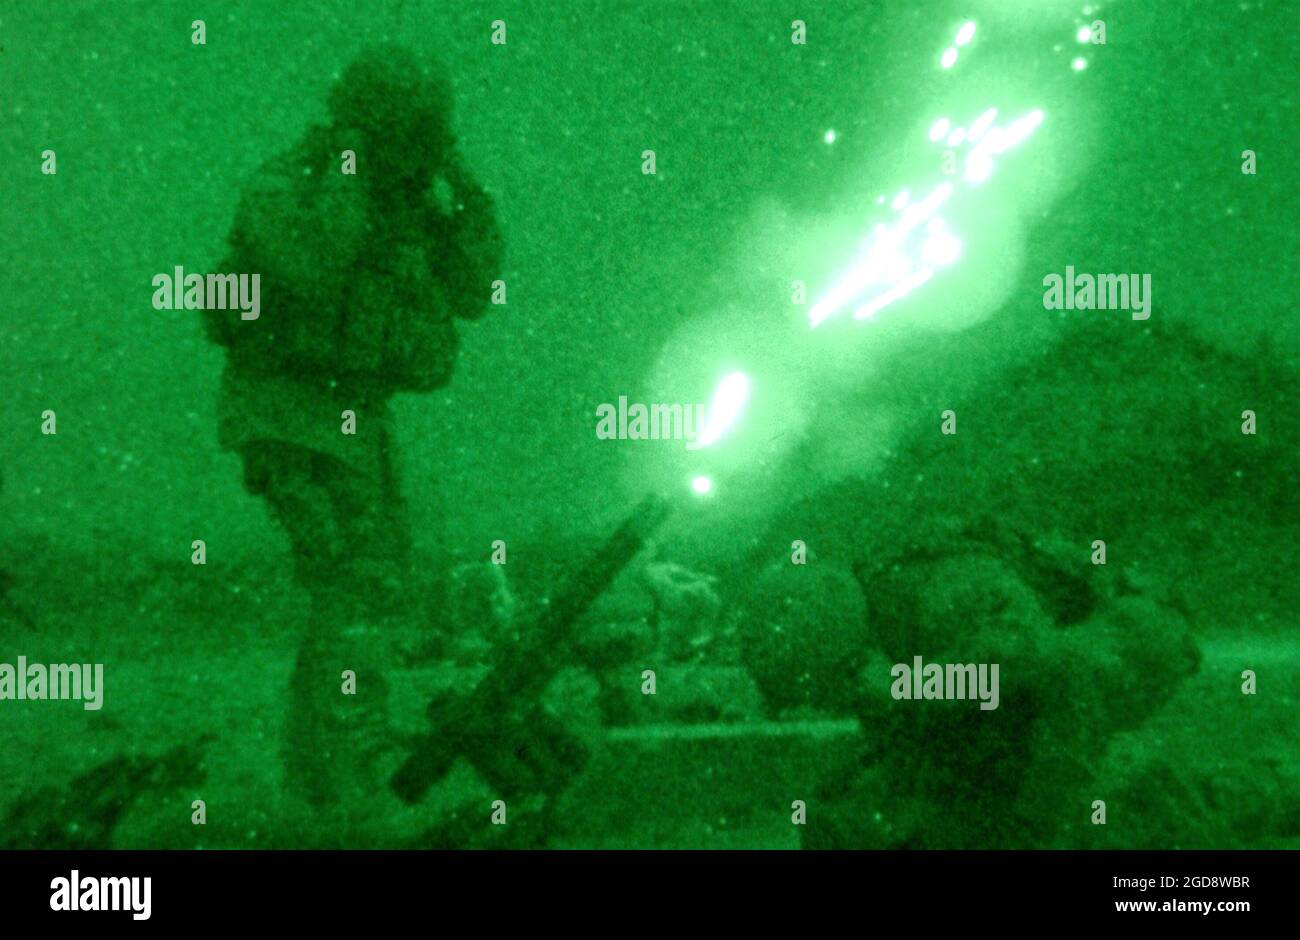 US Army (USA) Soldiers assigned to Alpha Company, 82nd Airborne Division, fire an M83A3 illumination round from their 60mm M224 lightweight company mortar, in order to get a better look at the outer perimeter of Bagram Air Base (AB), Afghanistan, during Operation ENDURING FREEDOM.  (USAF PHOTO BY SSGT CHERIE A. THURLBY 030116-F-7203T-006) Stock Photo